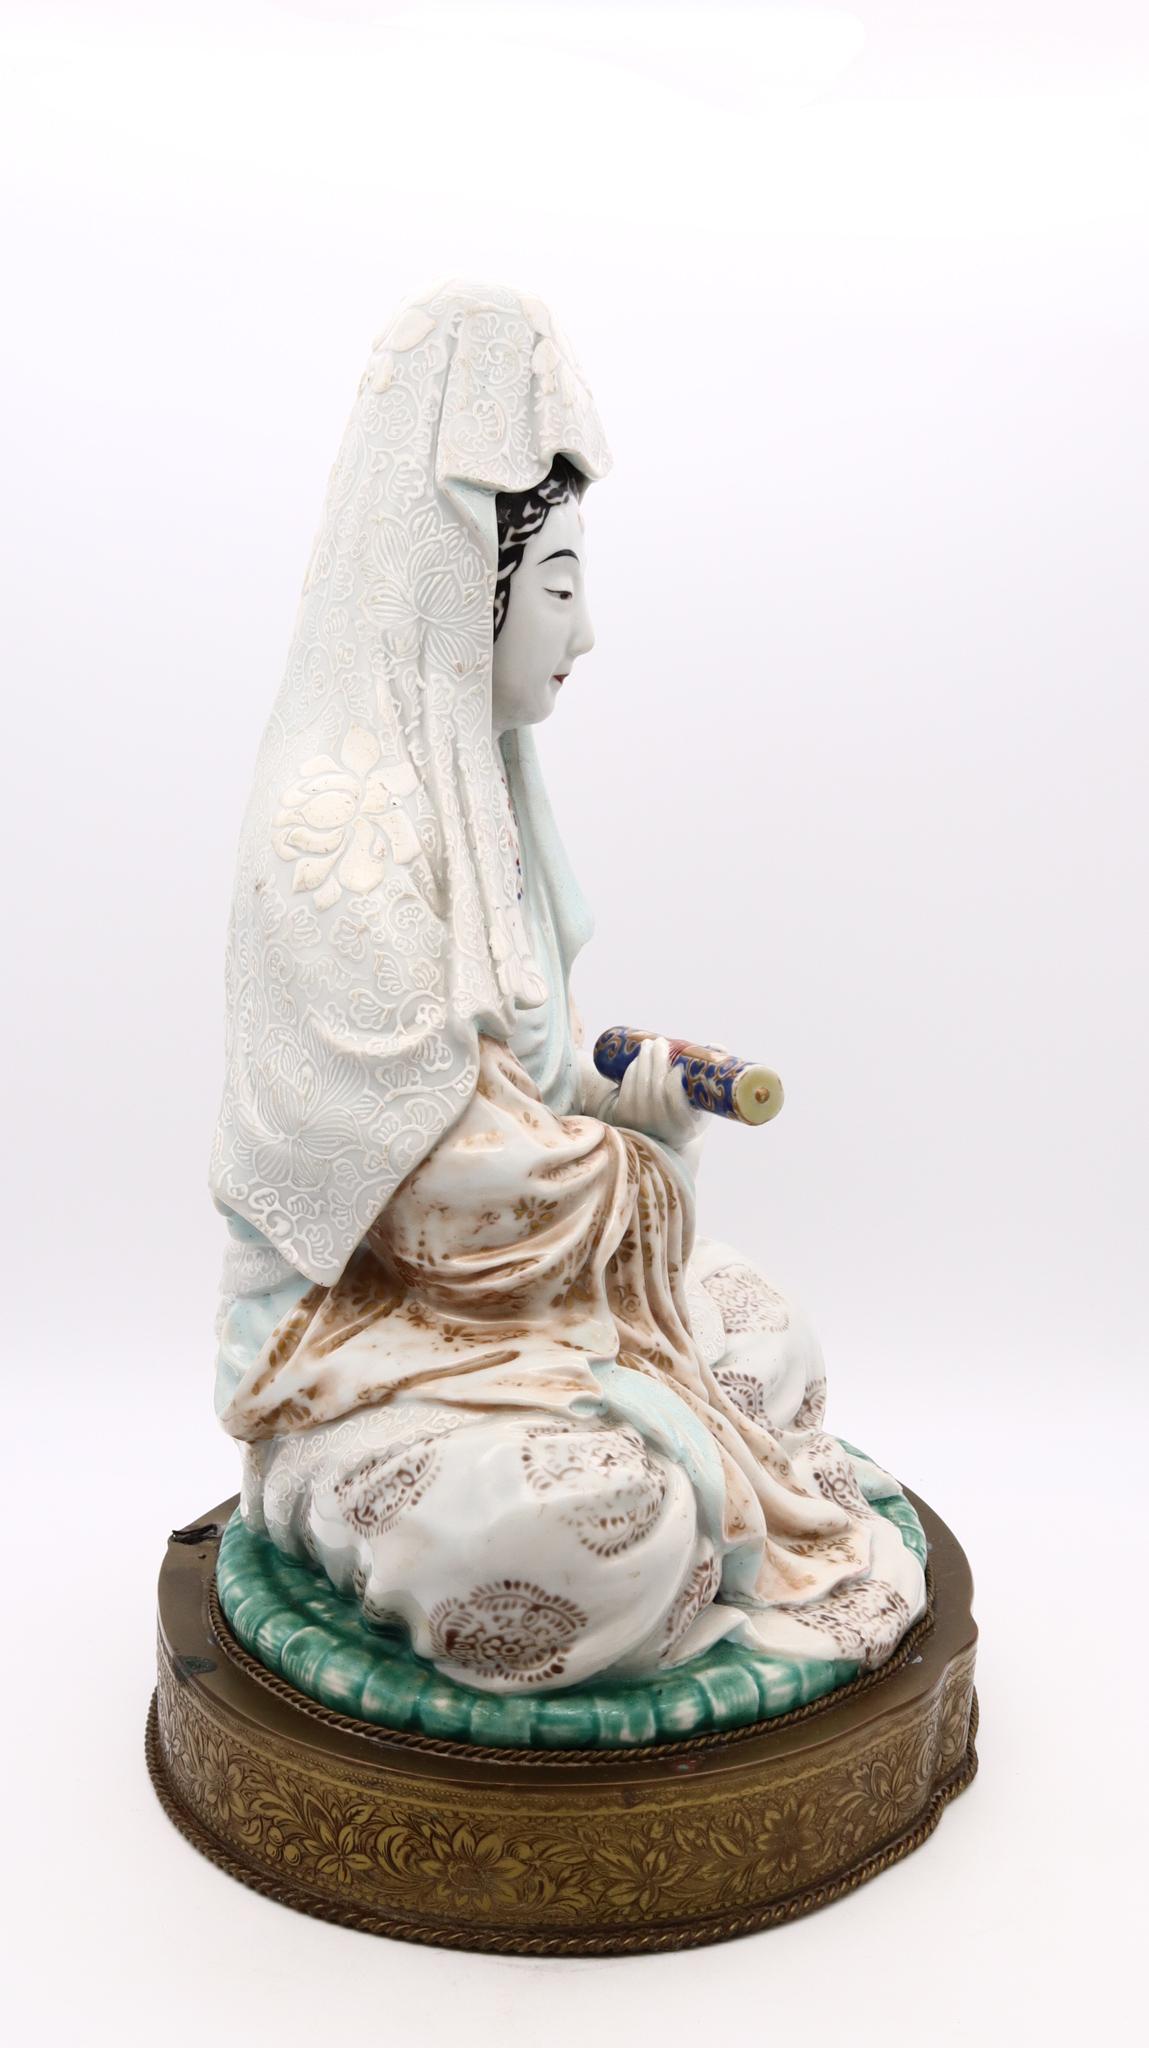 Polychromed Japan 1890 Meiji Period Seated Figure of Quan Yin in Enamelled White Porcelain